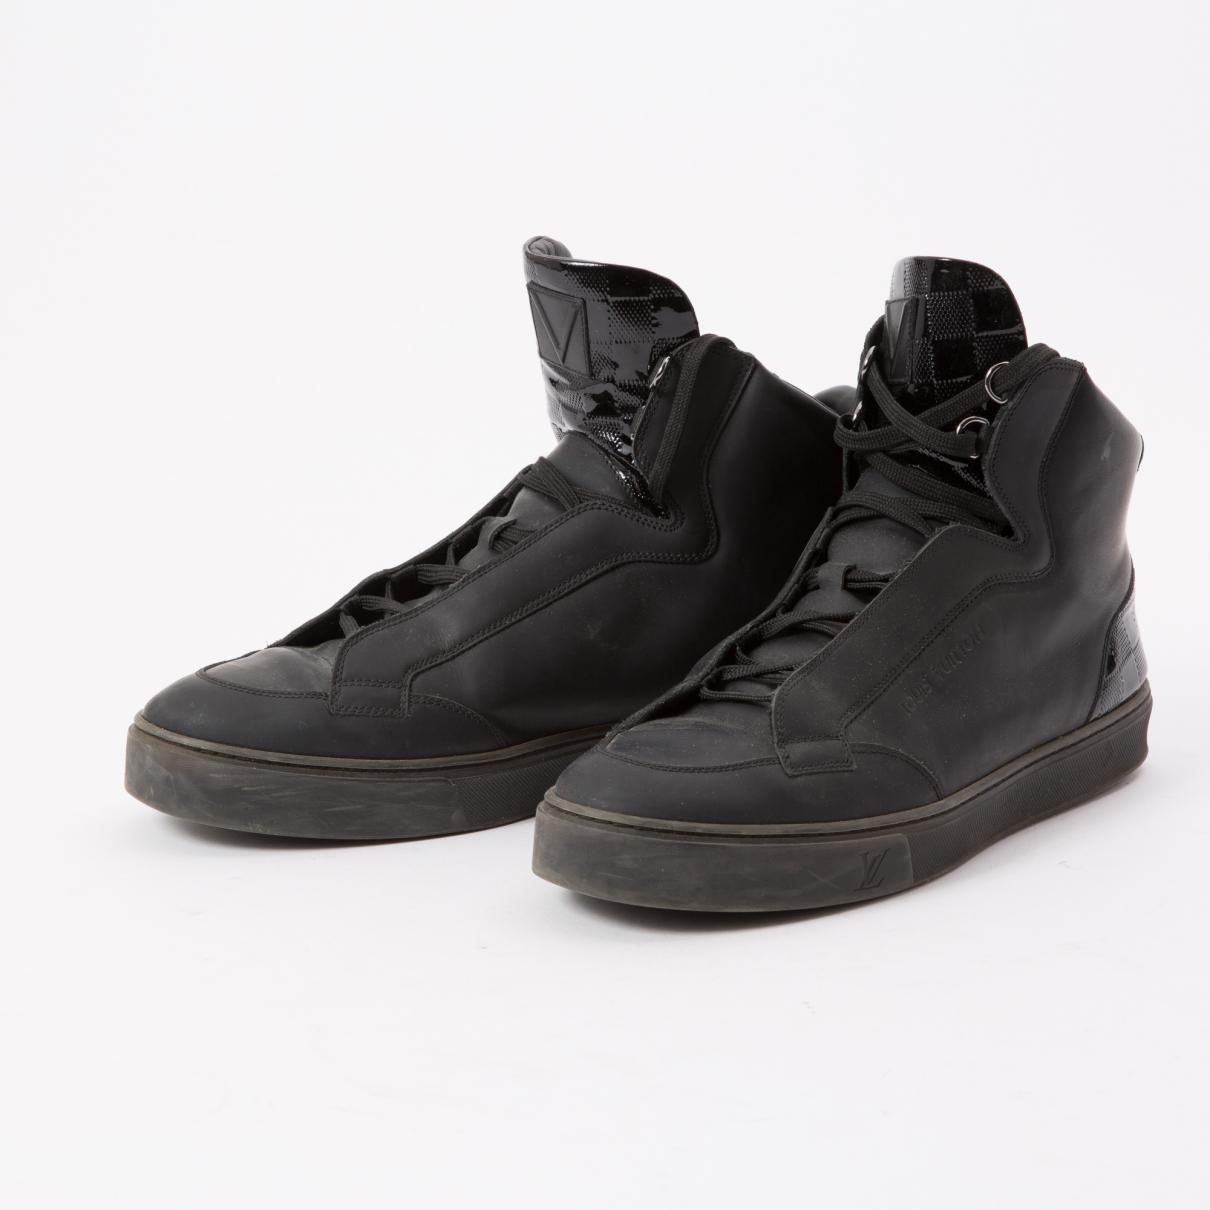 Trainer sneaker boot high leather high trainers Louis Vuitton